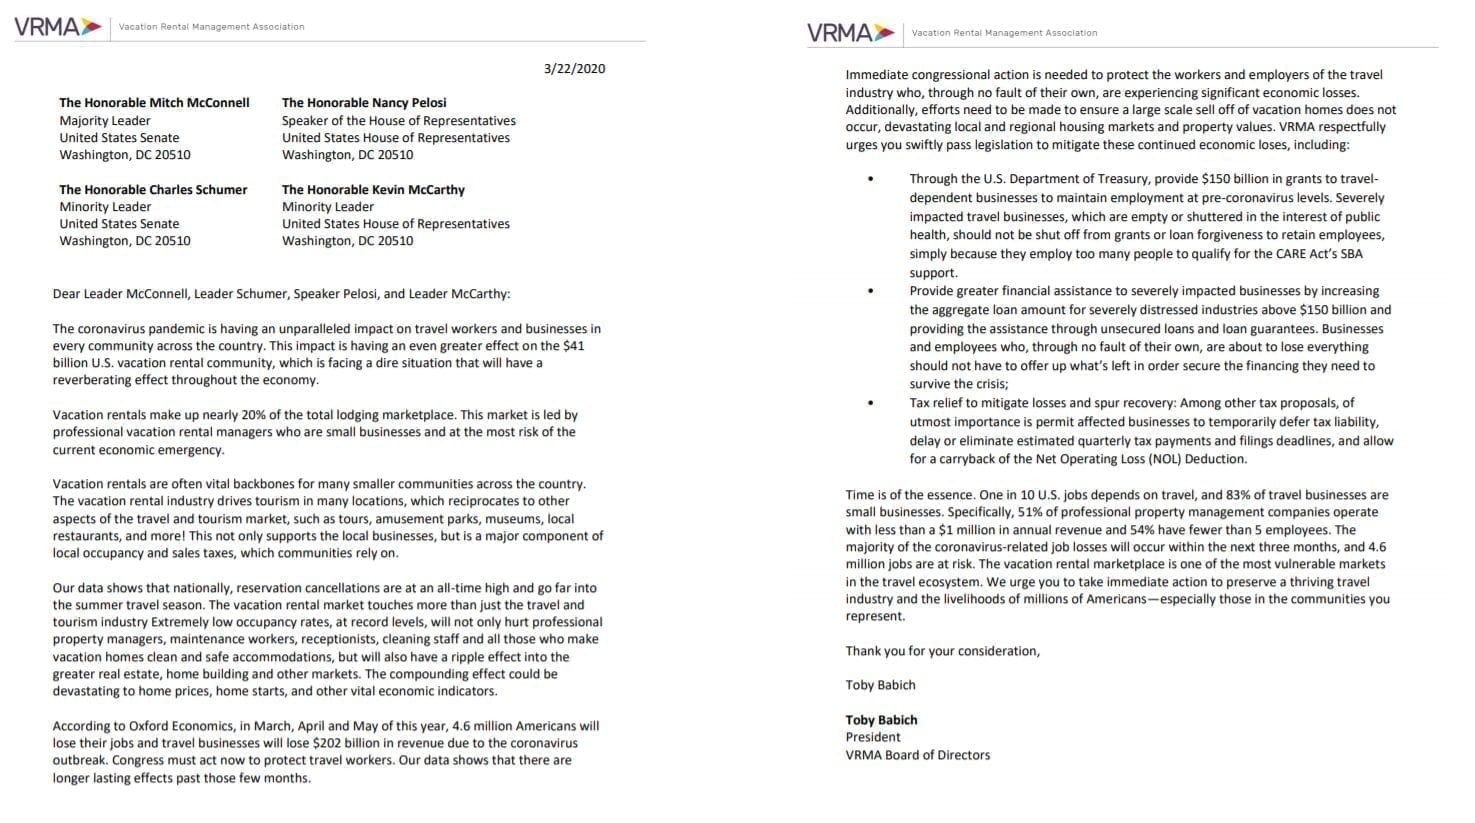 VRMA Letter to Congress to get Relief for Vacation Rental Companies